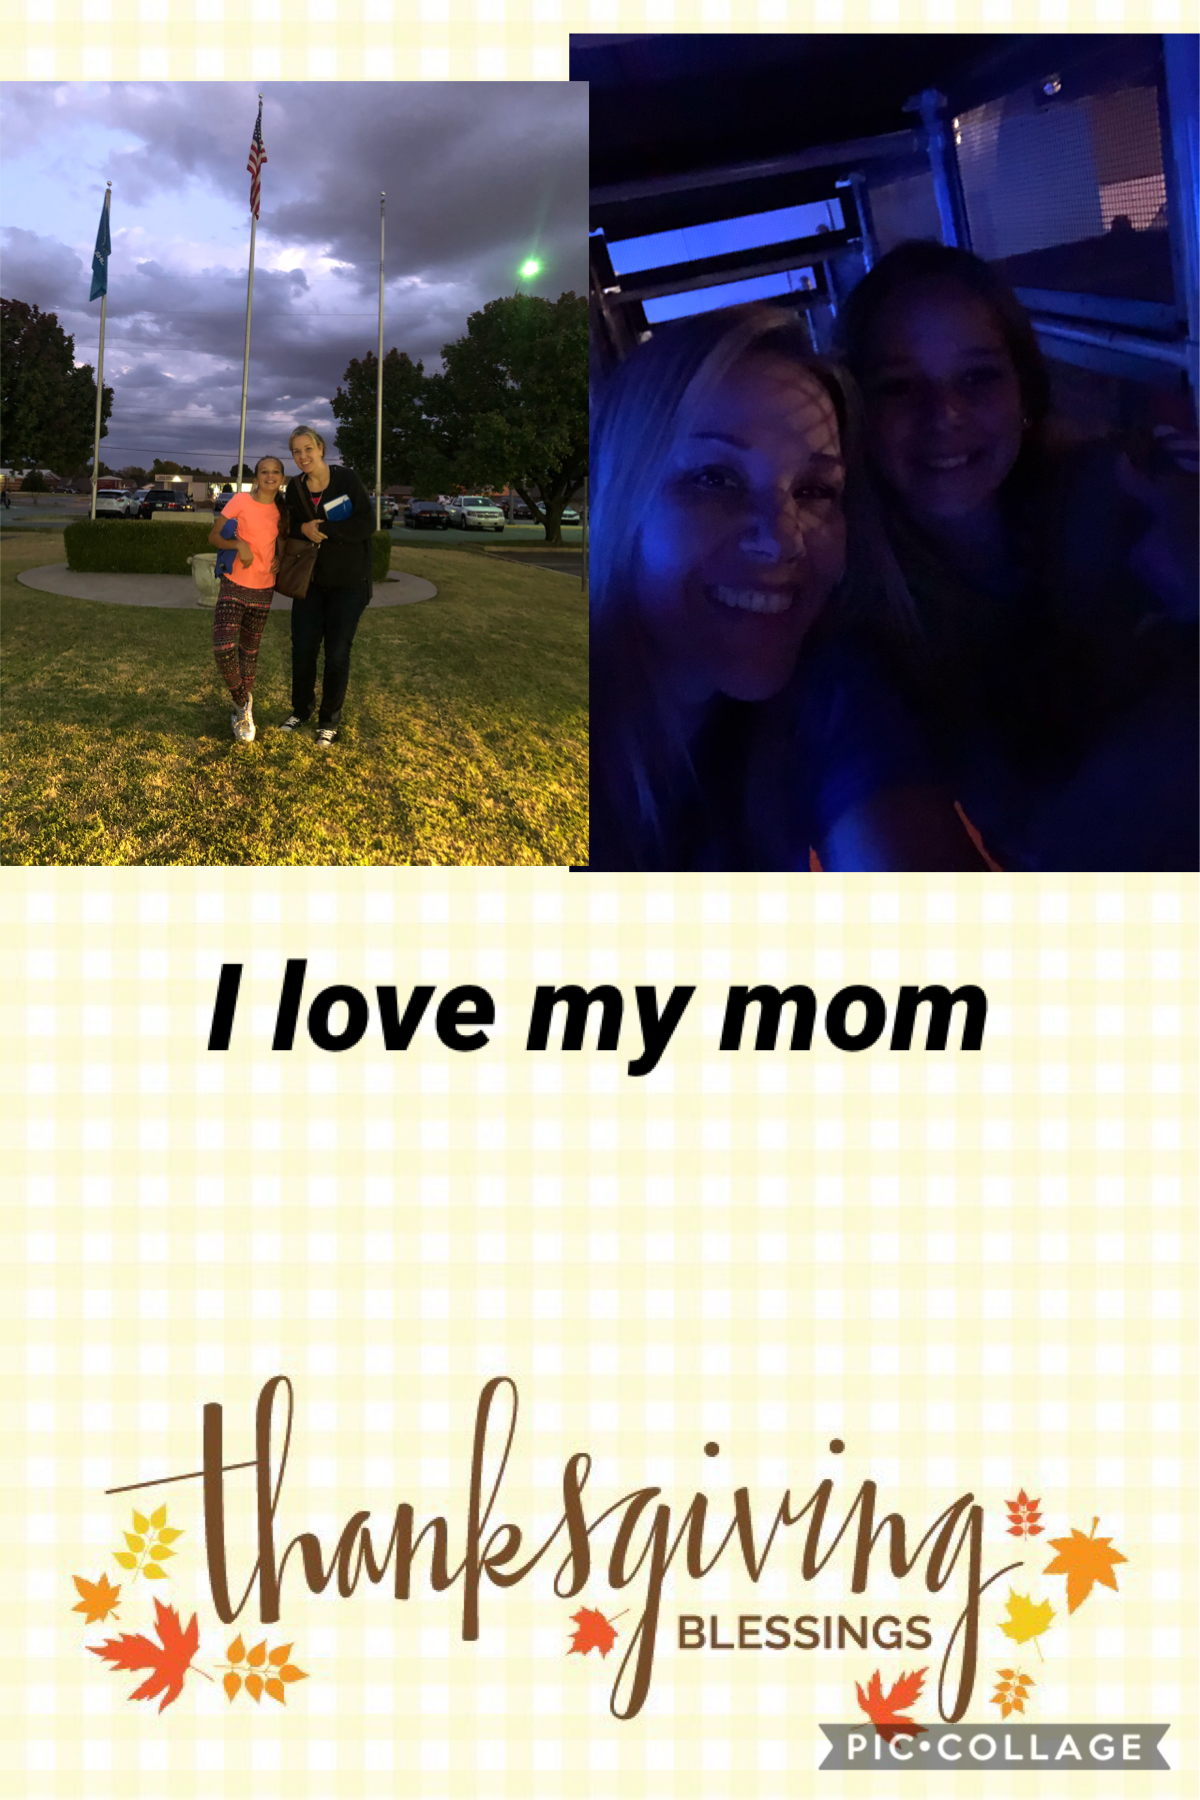 Me and my mom have a special connection it’s like I can tell her anything and I want her to know that I love her very much